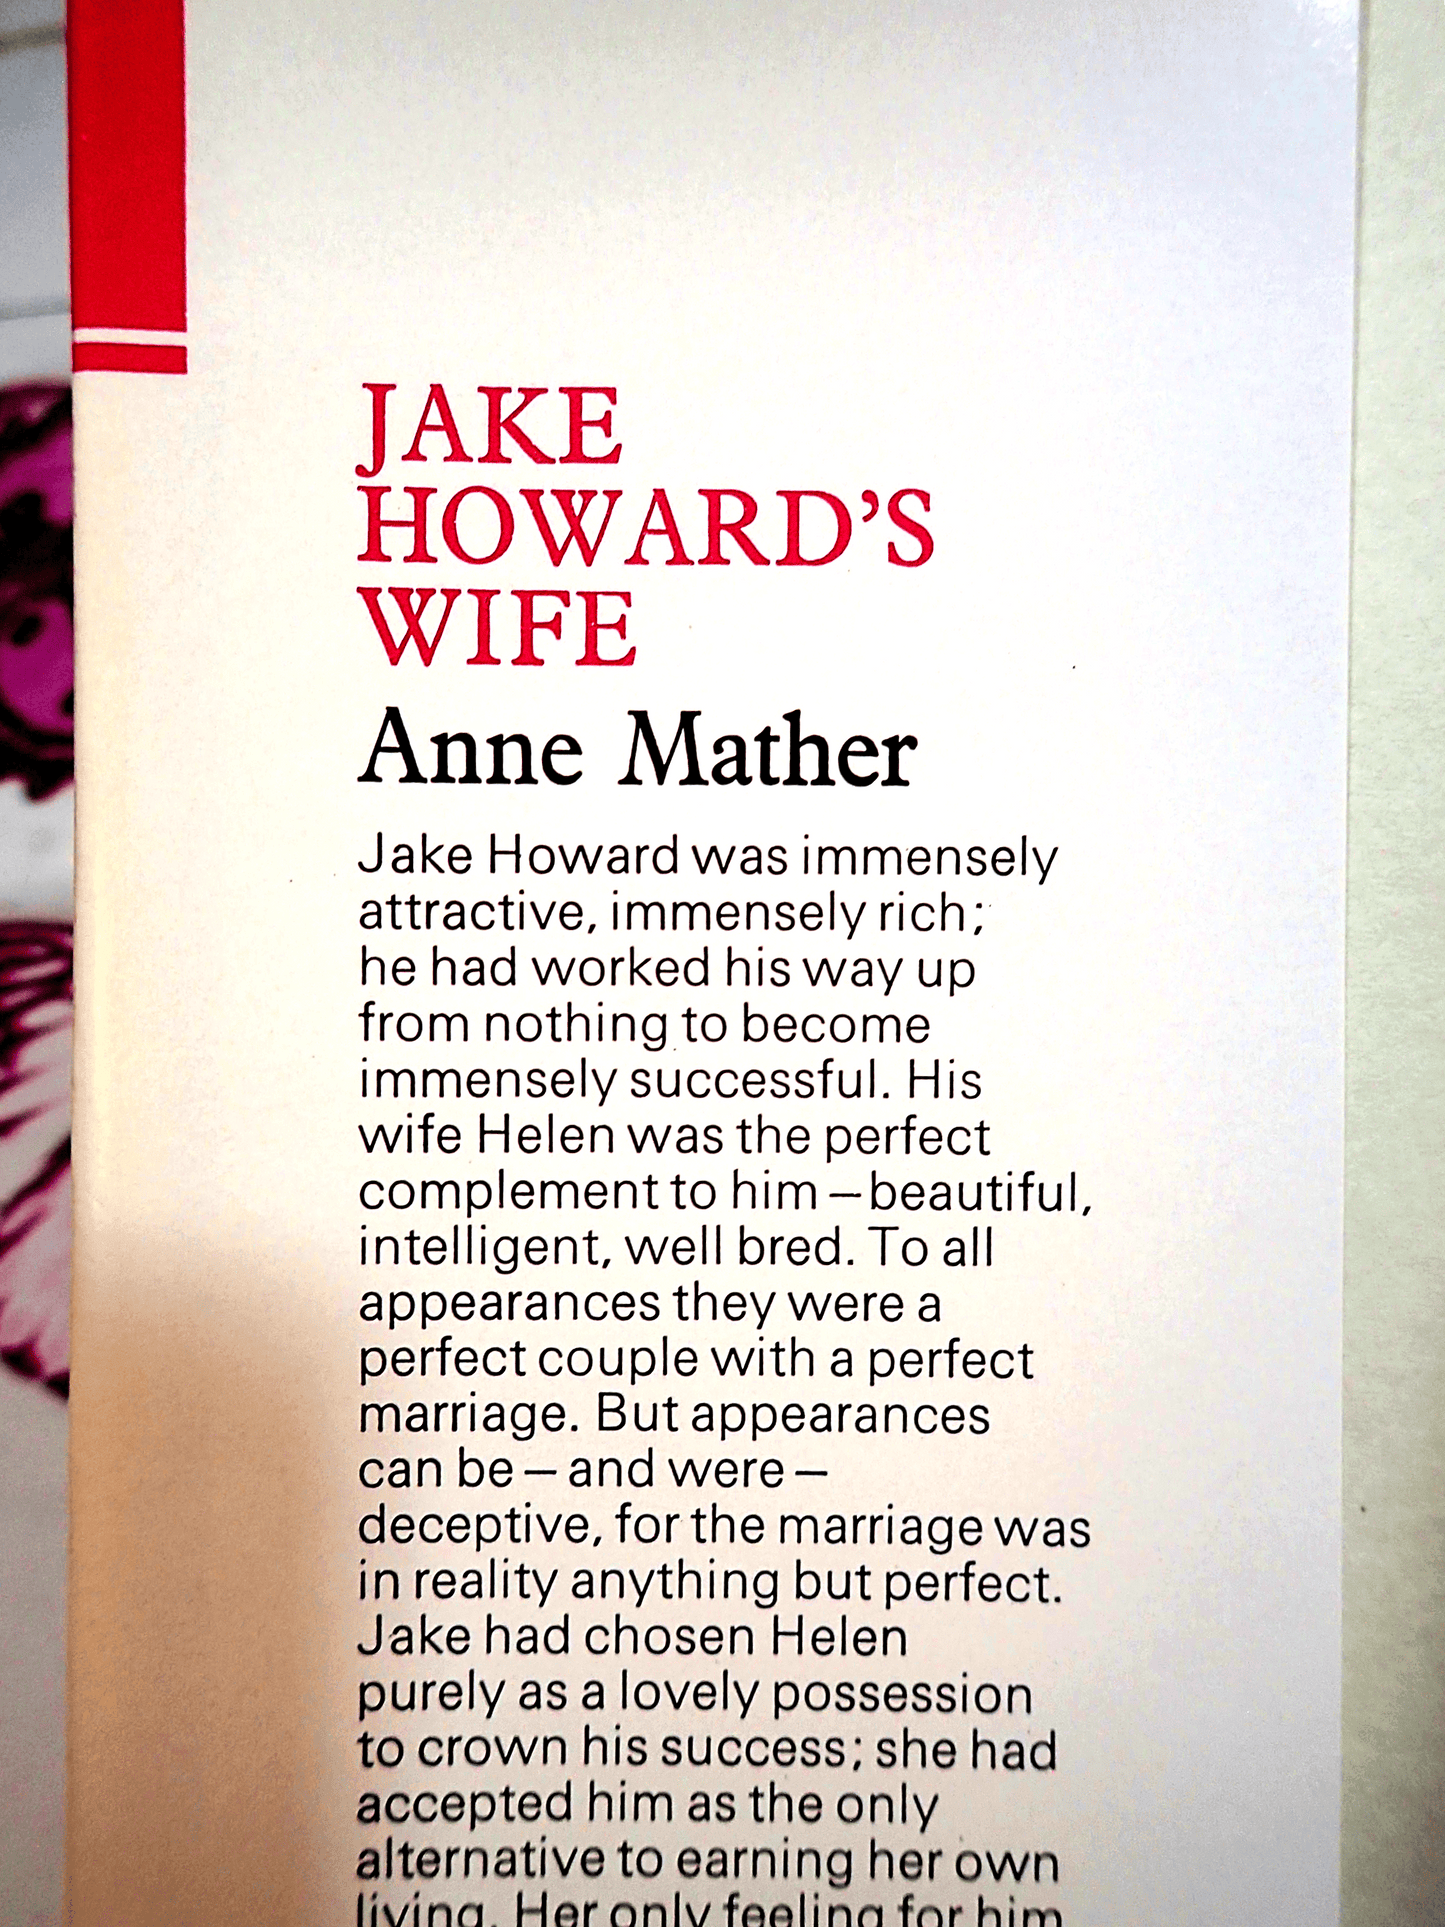 Text blurb on dust jacket of Jake Howard's Wife Anne Mather